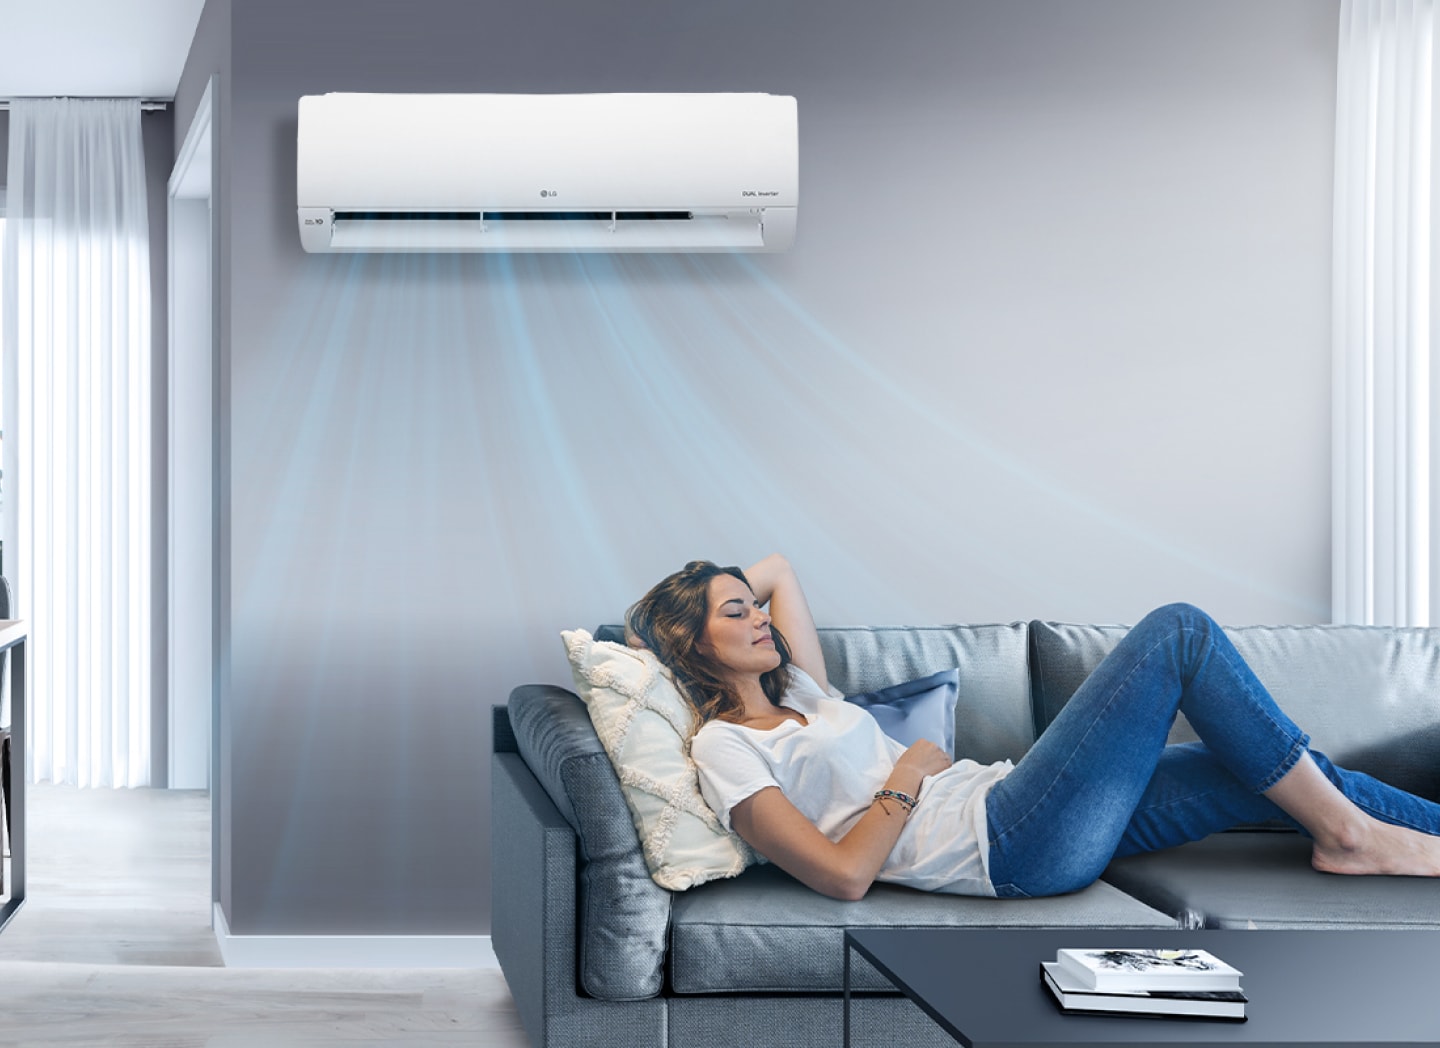 A woman lounges on a couch in a living room with the LG air conditioner installed above her on the wall. Blue streams of air are on the image to indicate it is on and cooling the room.	